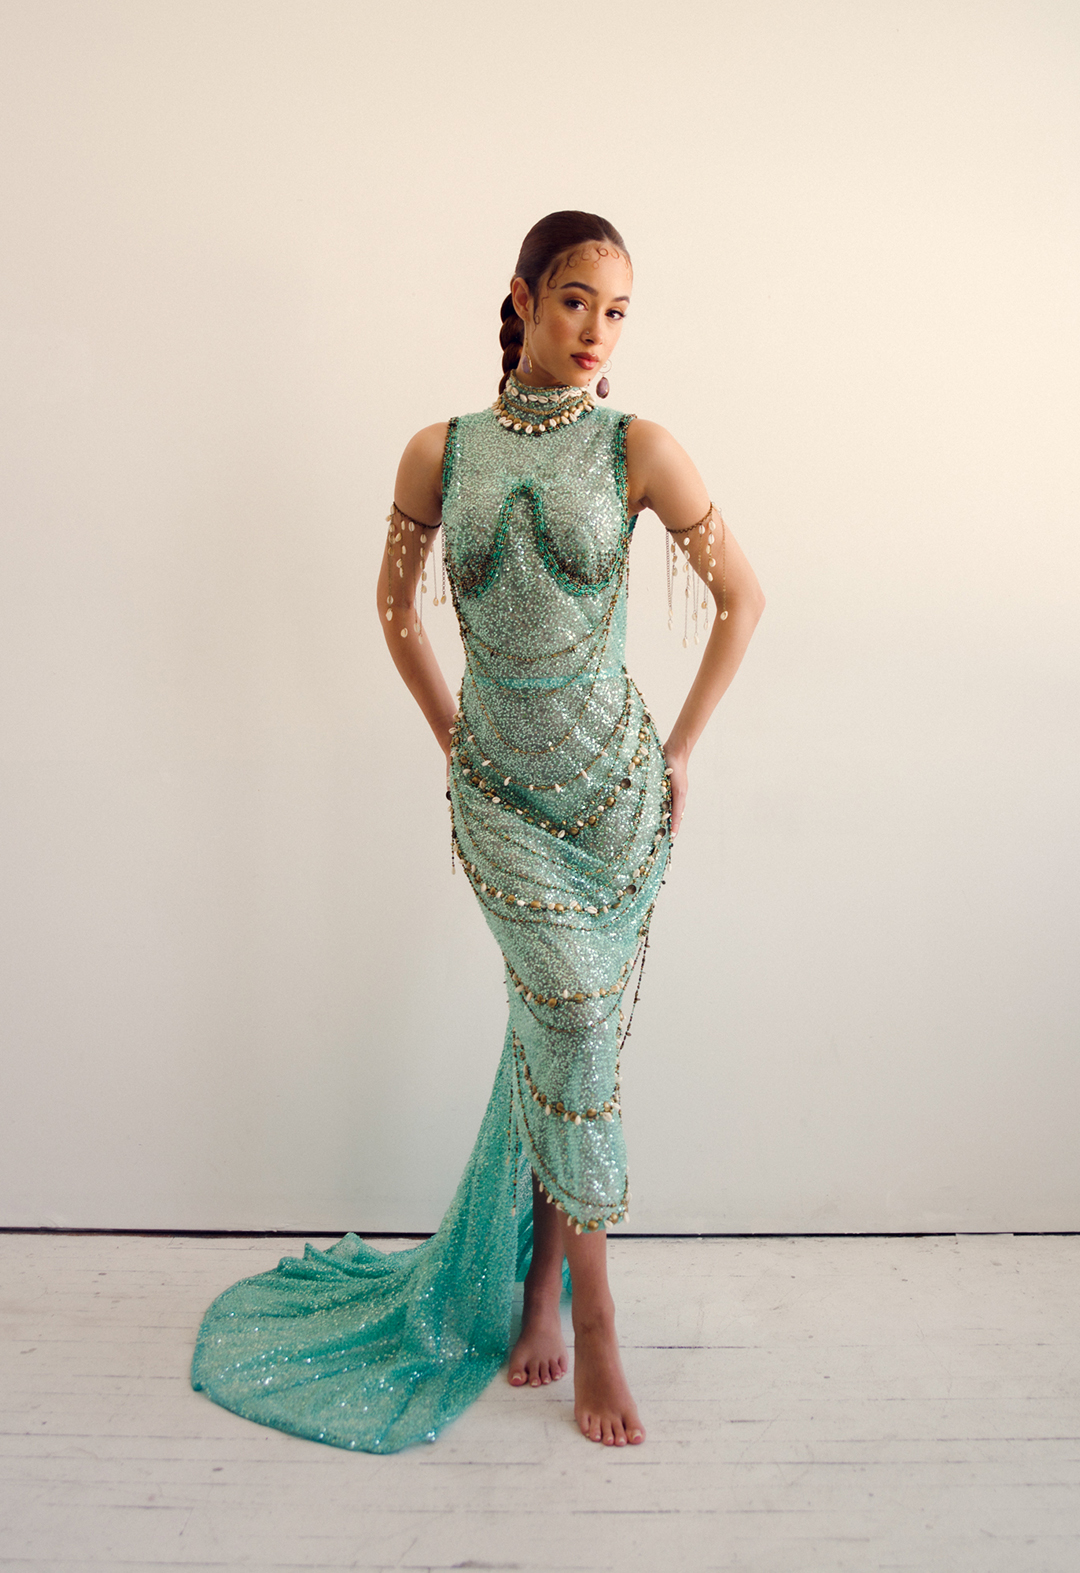 Front view of a model wearing a turquoise beaded dress. The background is white. 